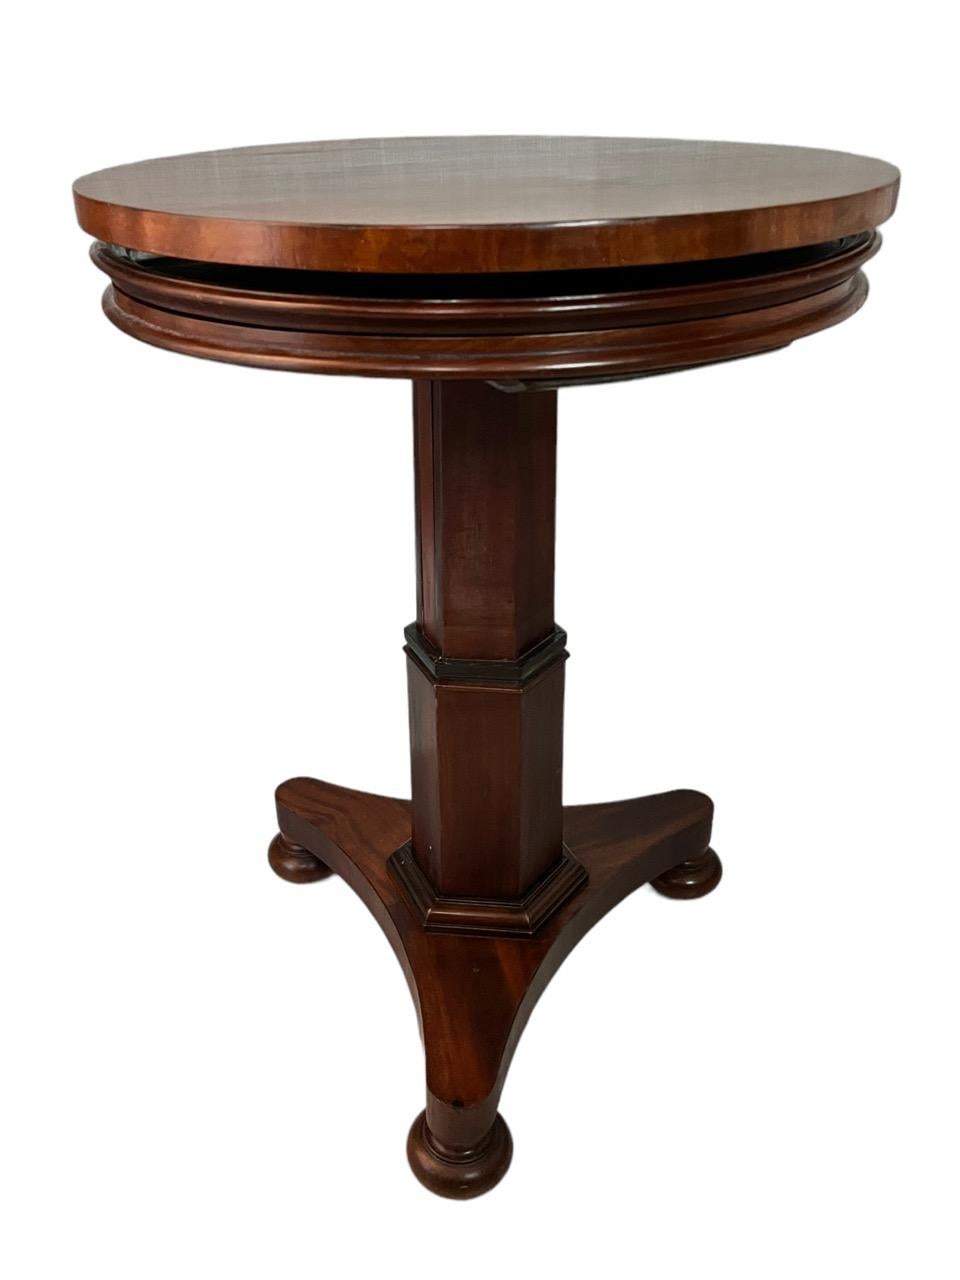 18th Century English Mahogany Expandable Round Three Tier Dumbwaiter Table For Sale 3